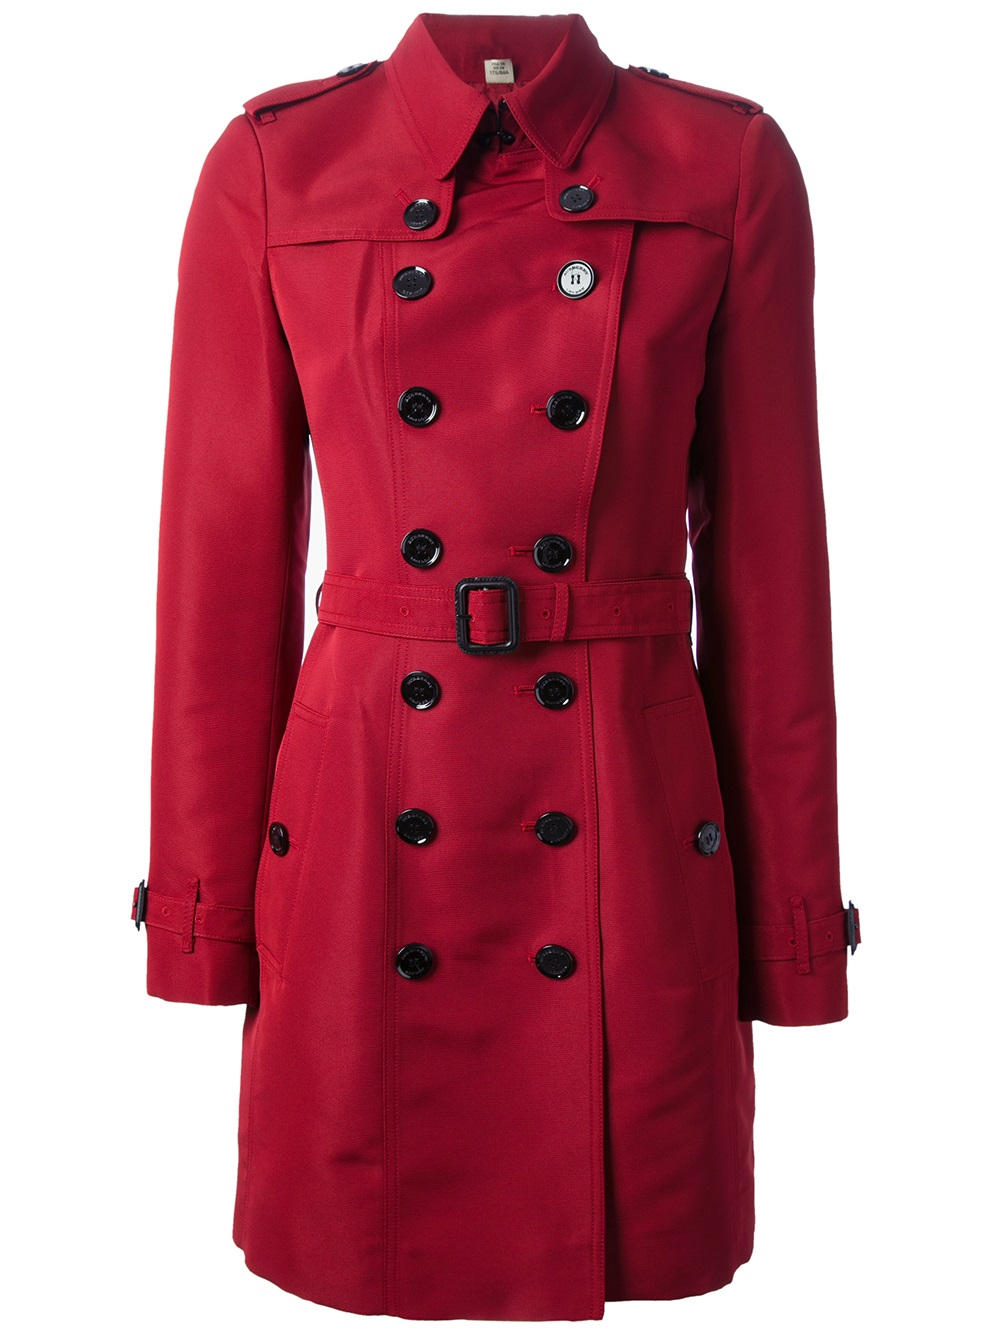 Lyst - Burberry Double Breasted Trench Coat in Red